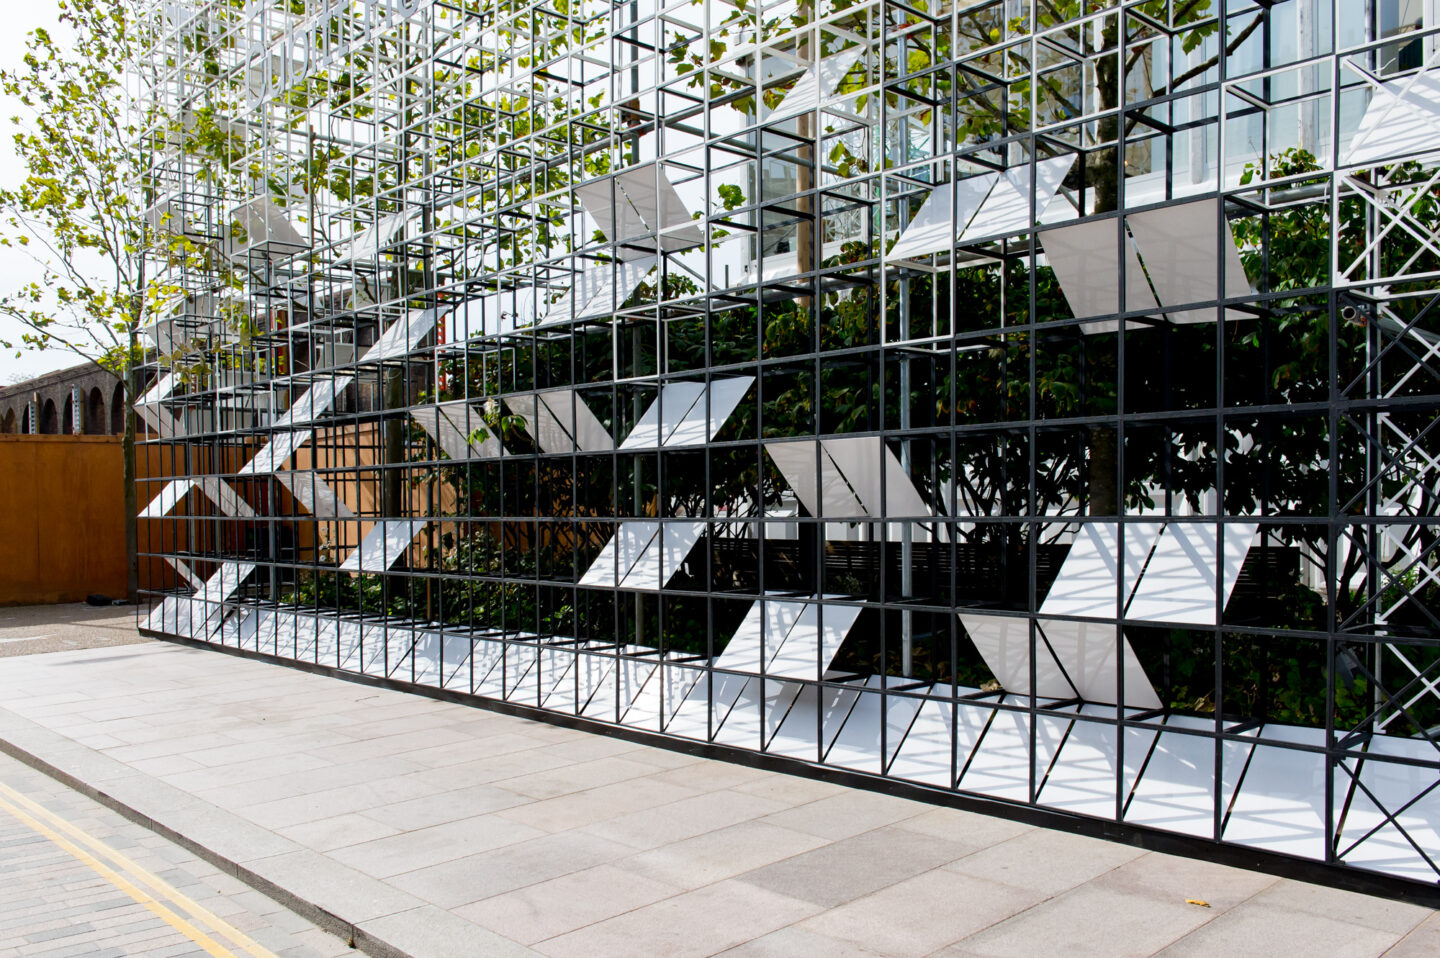 The world's largest installation of a modular GRID system